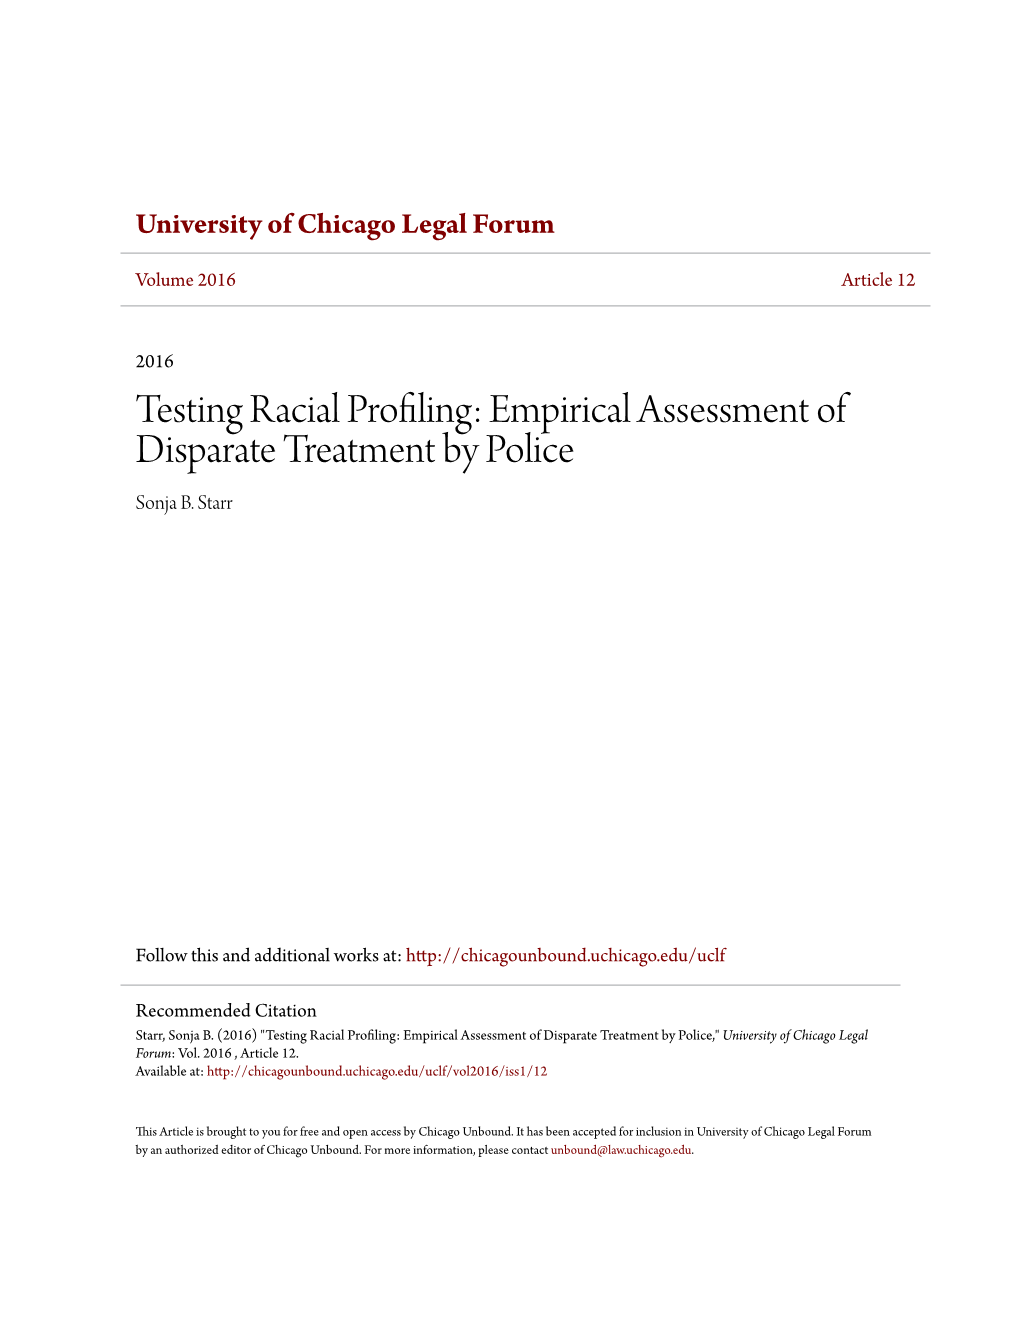 Testing Racial Profiling: Empirical Assessment of Disparate Treatment by Police Sonja B